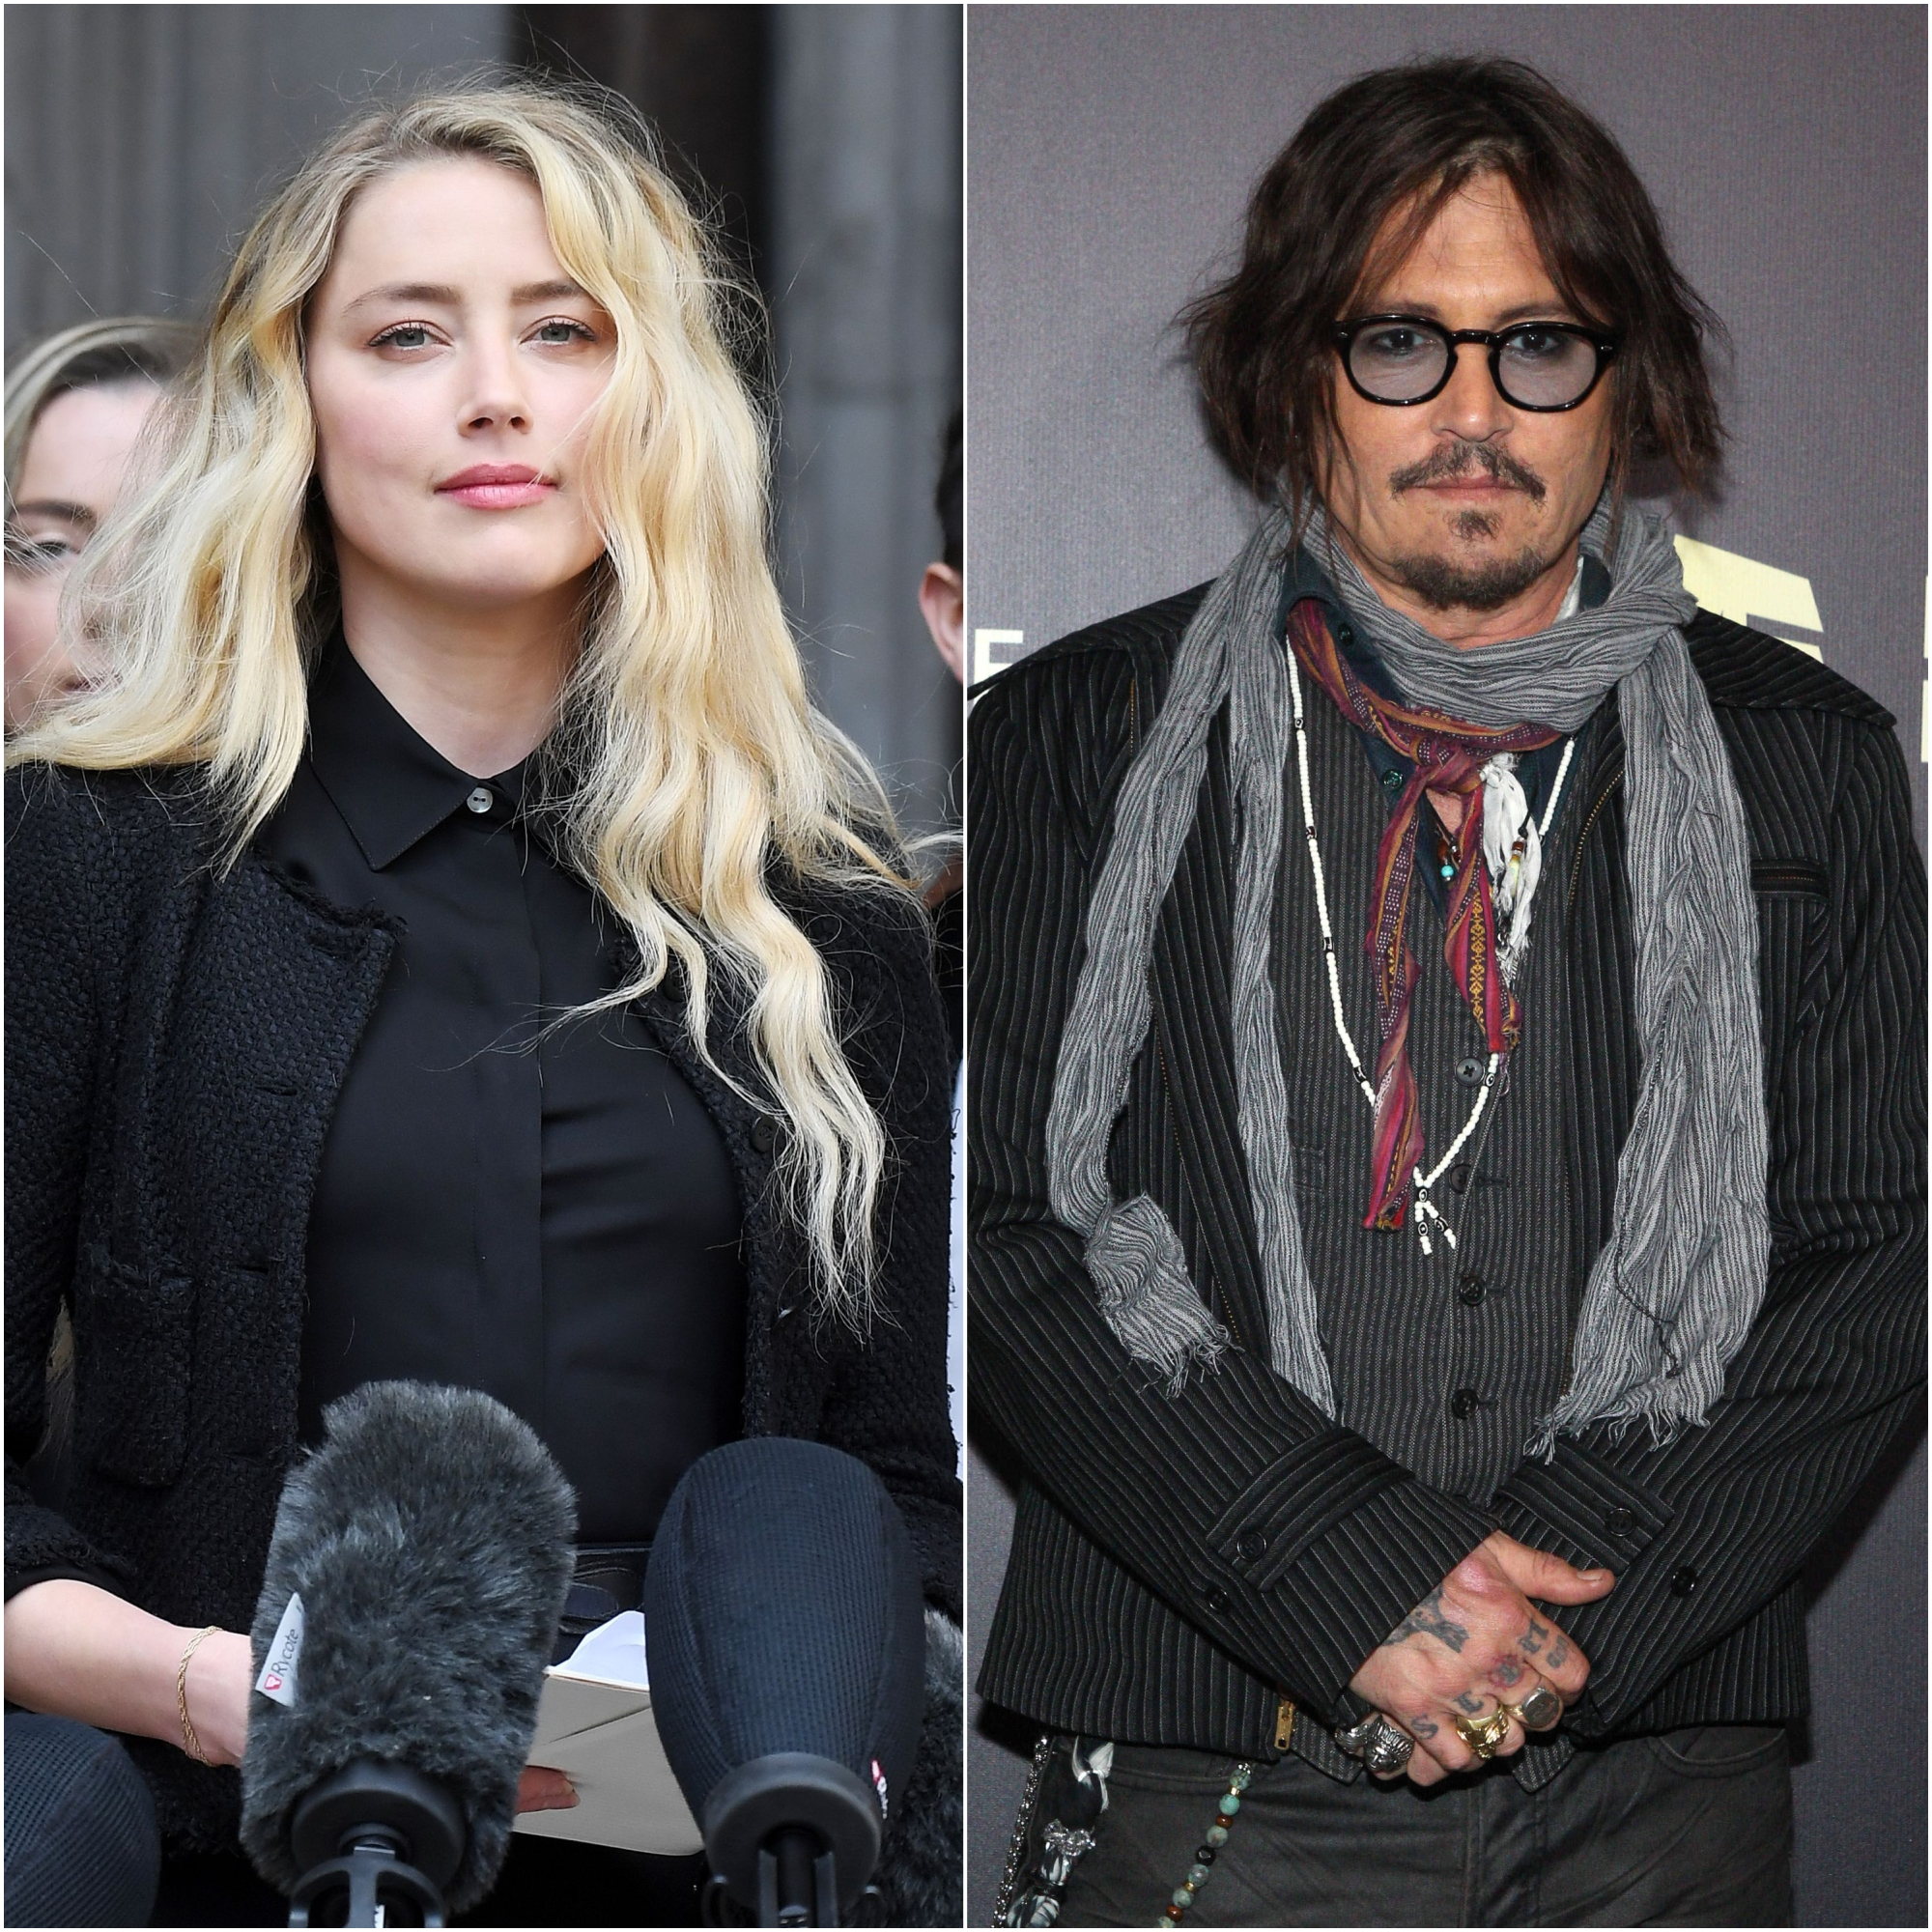 Amber Heard Has A Love for Ex Johnny Depp Amid Lawsuits